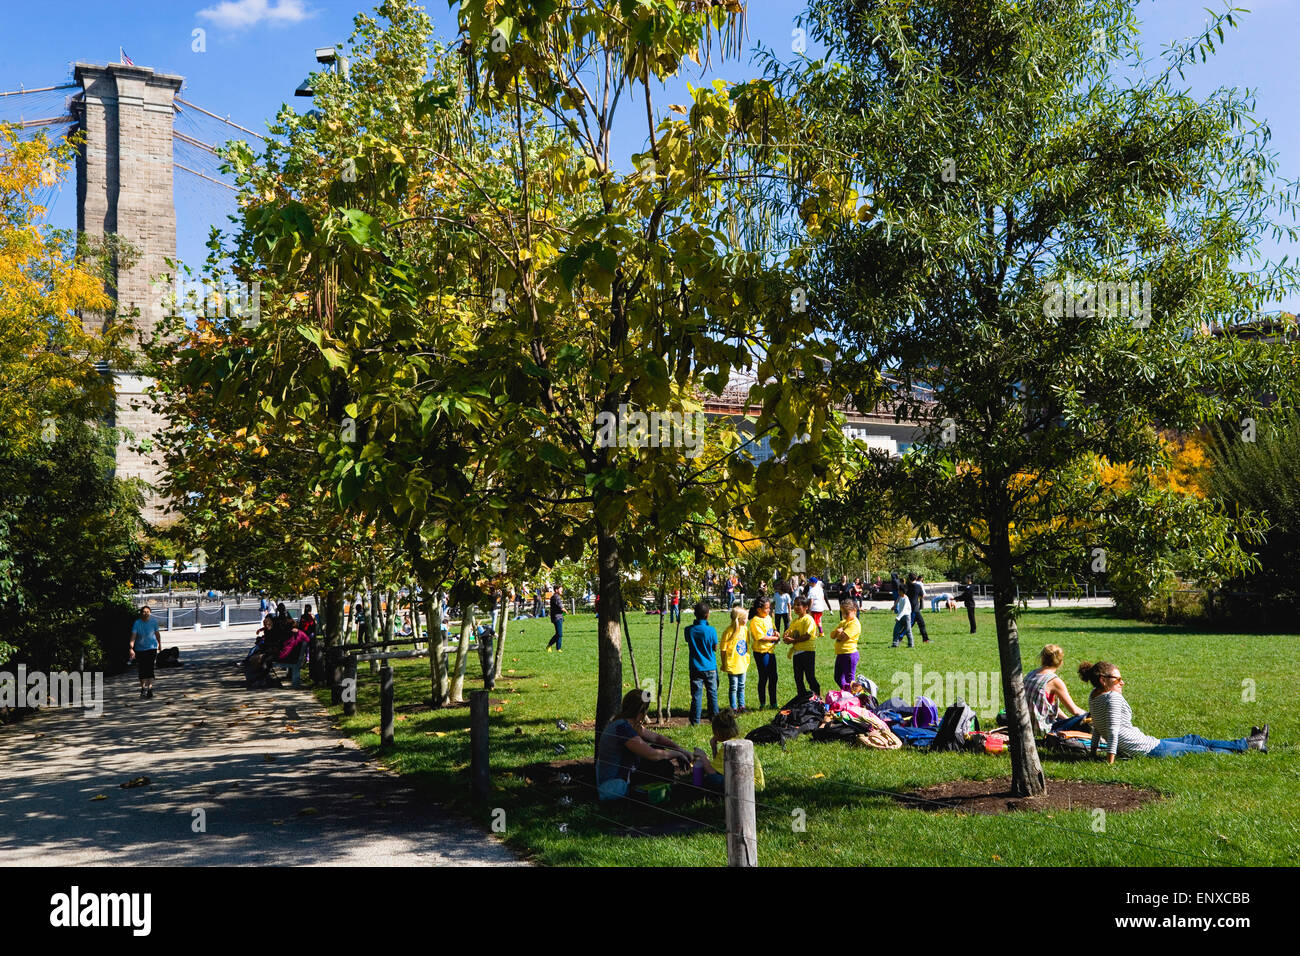 USA, New York State, New York City, NYC, Brooklyn Bridge Park, people on the grass of Harbor View Lawns at Pier 1 below the suspension bridge in autumn. Stock Photo